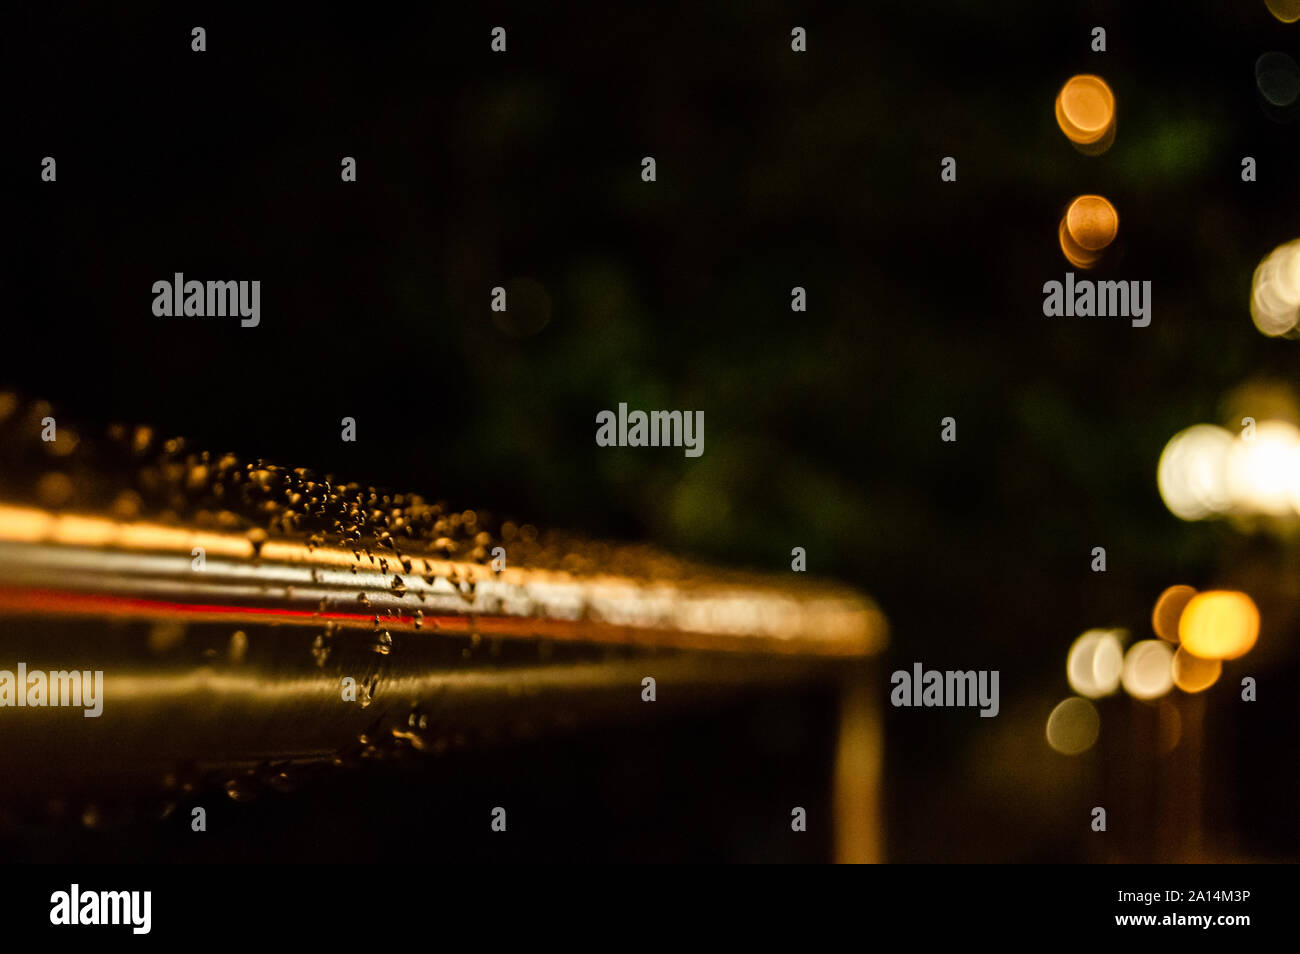 A handrail is covered in raindrops at night. Shallow focus. Copy space background. Stock Photo